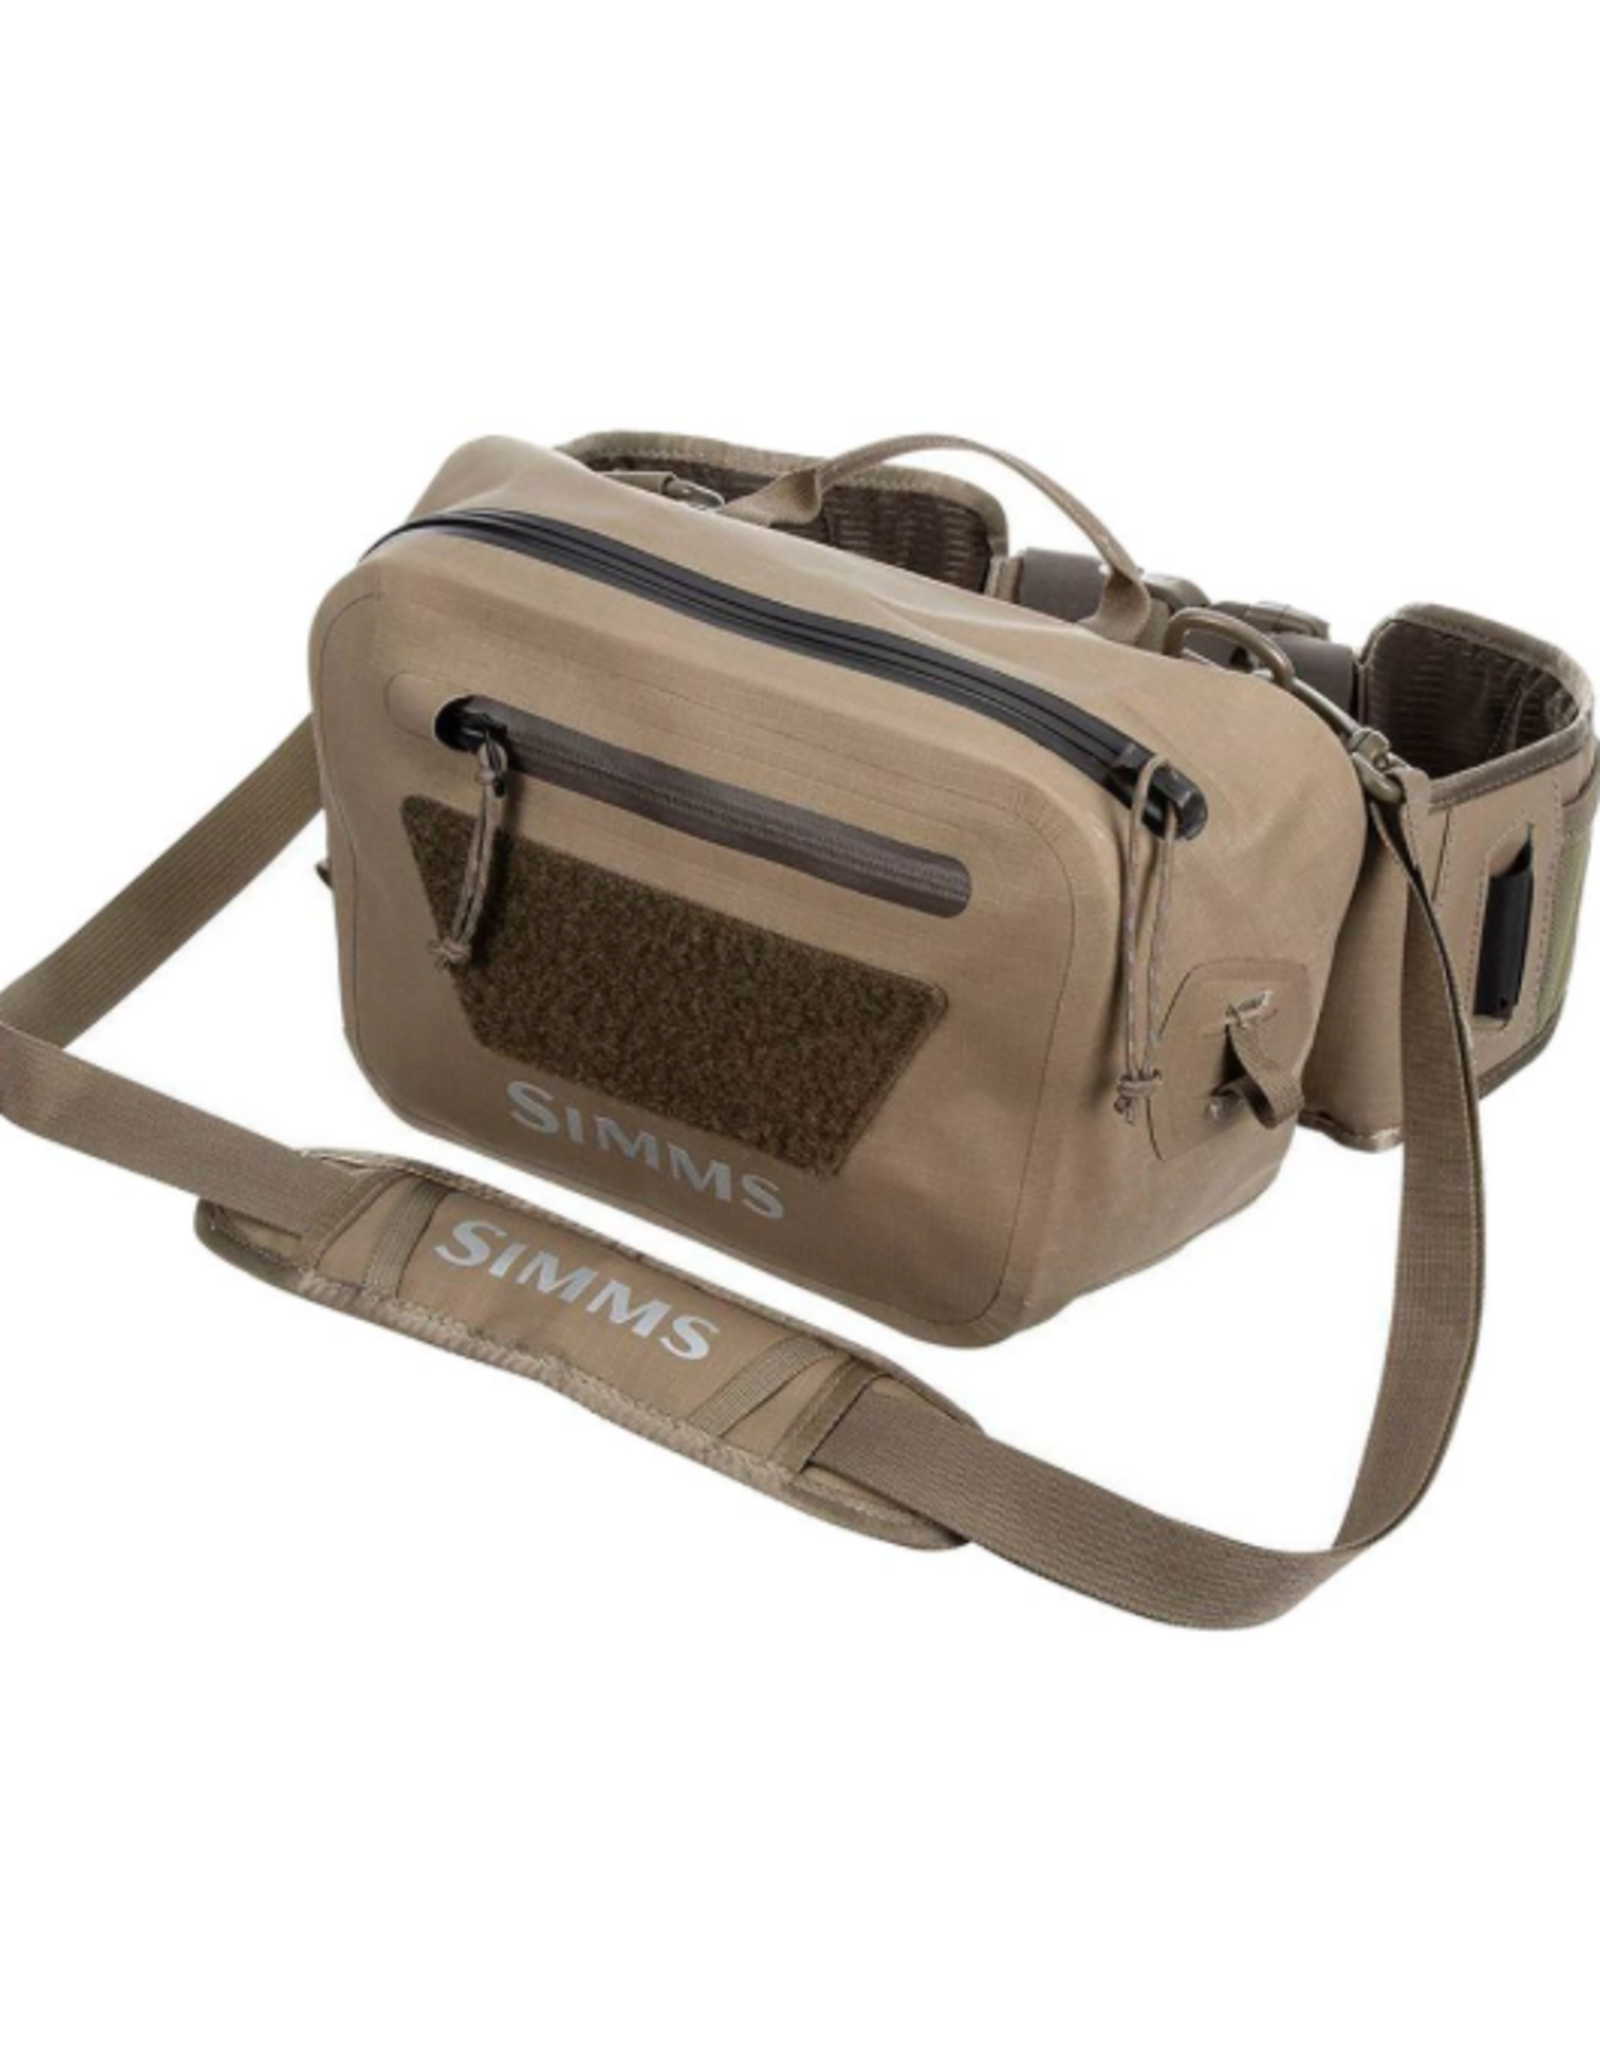 Simms - Dry Creek Z Hip Pack - Mountain Angler